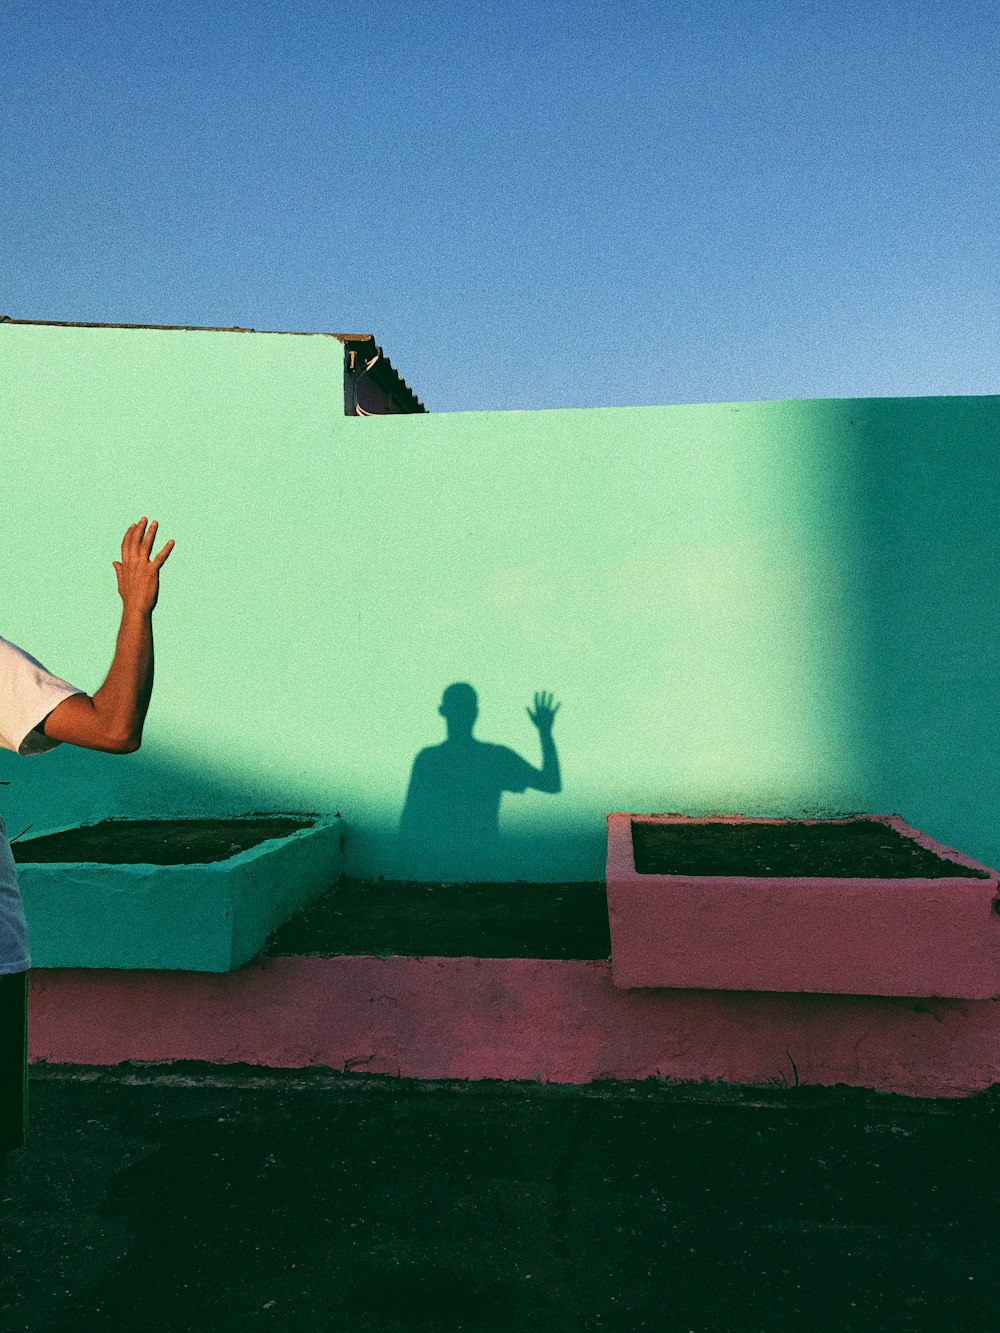 person waving reflecting shadow on teal wall paint